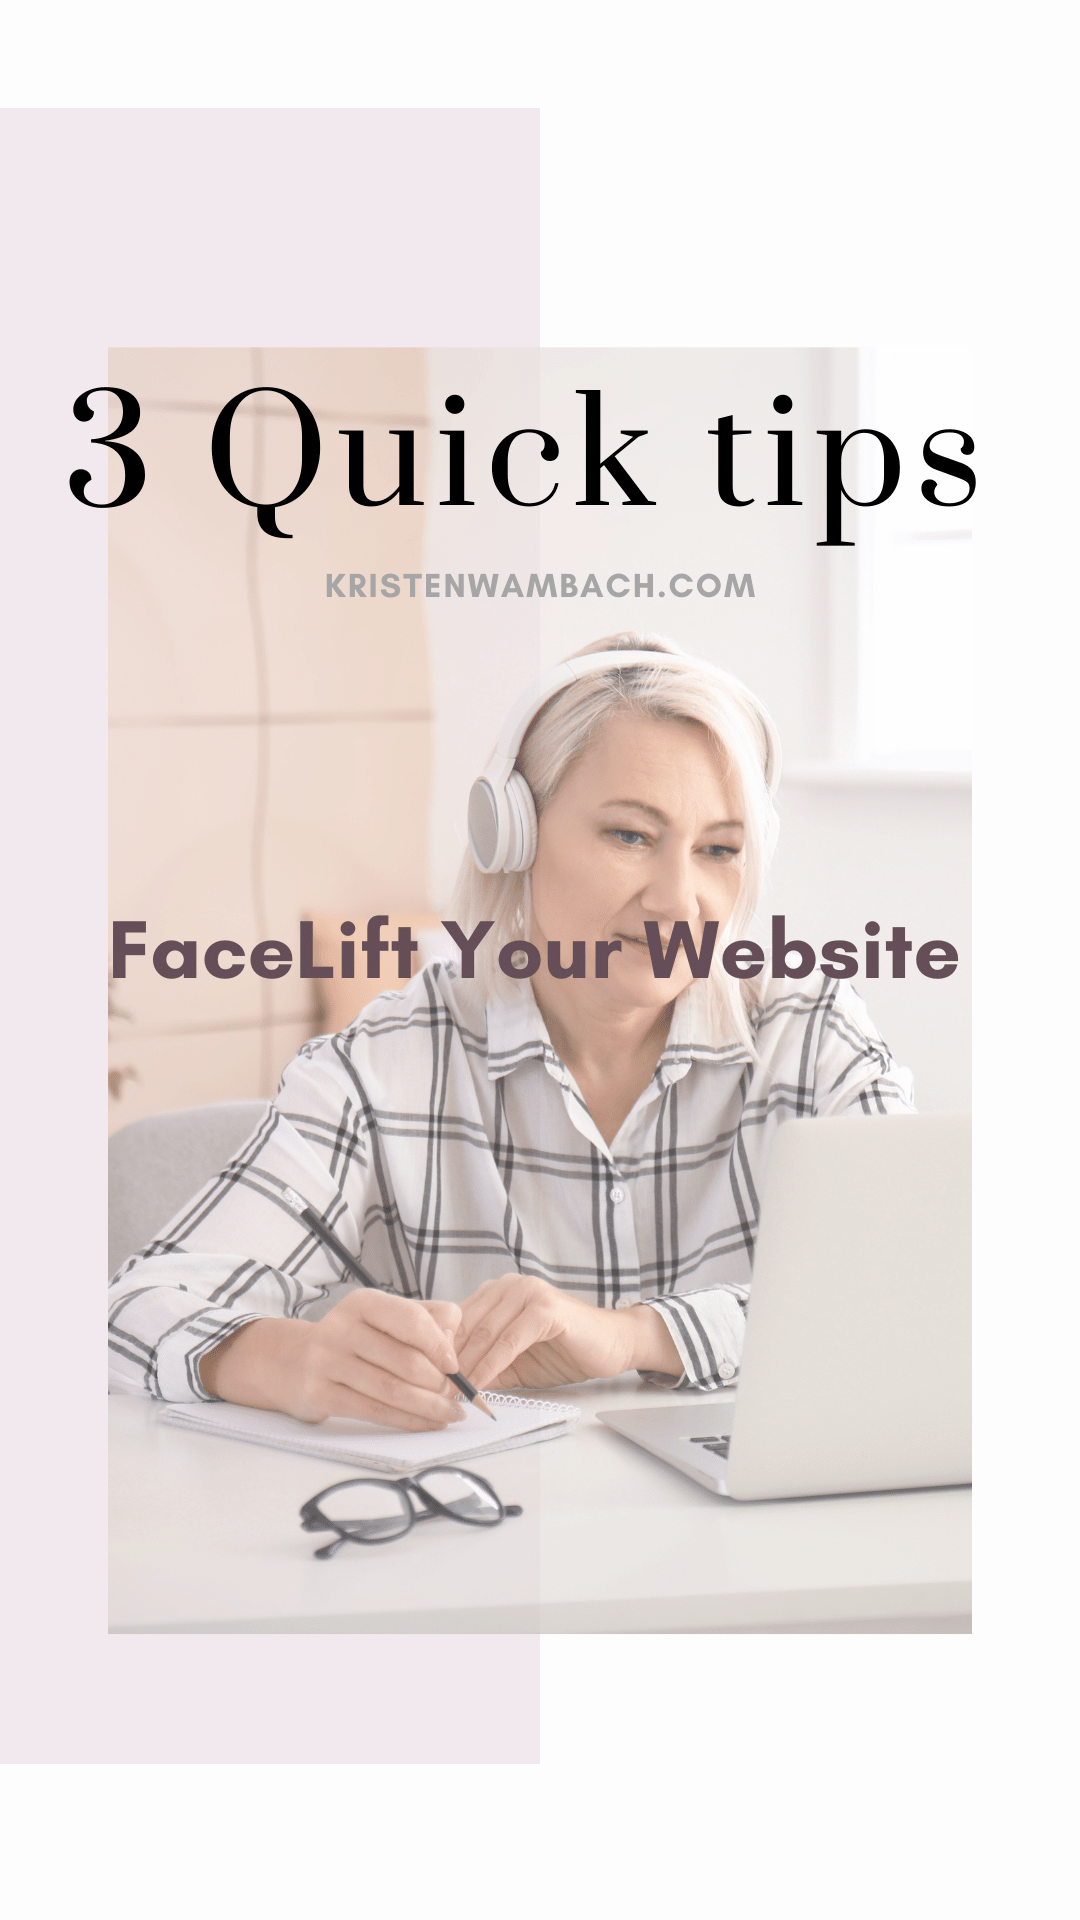 3 Quick tips facelift your website 